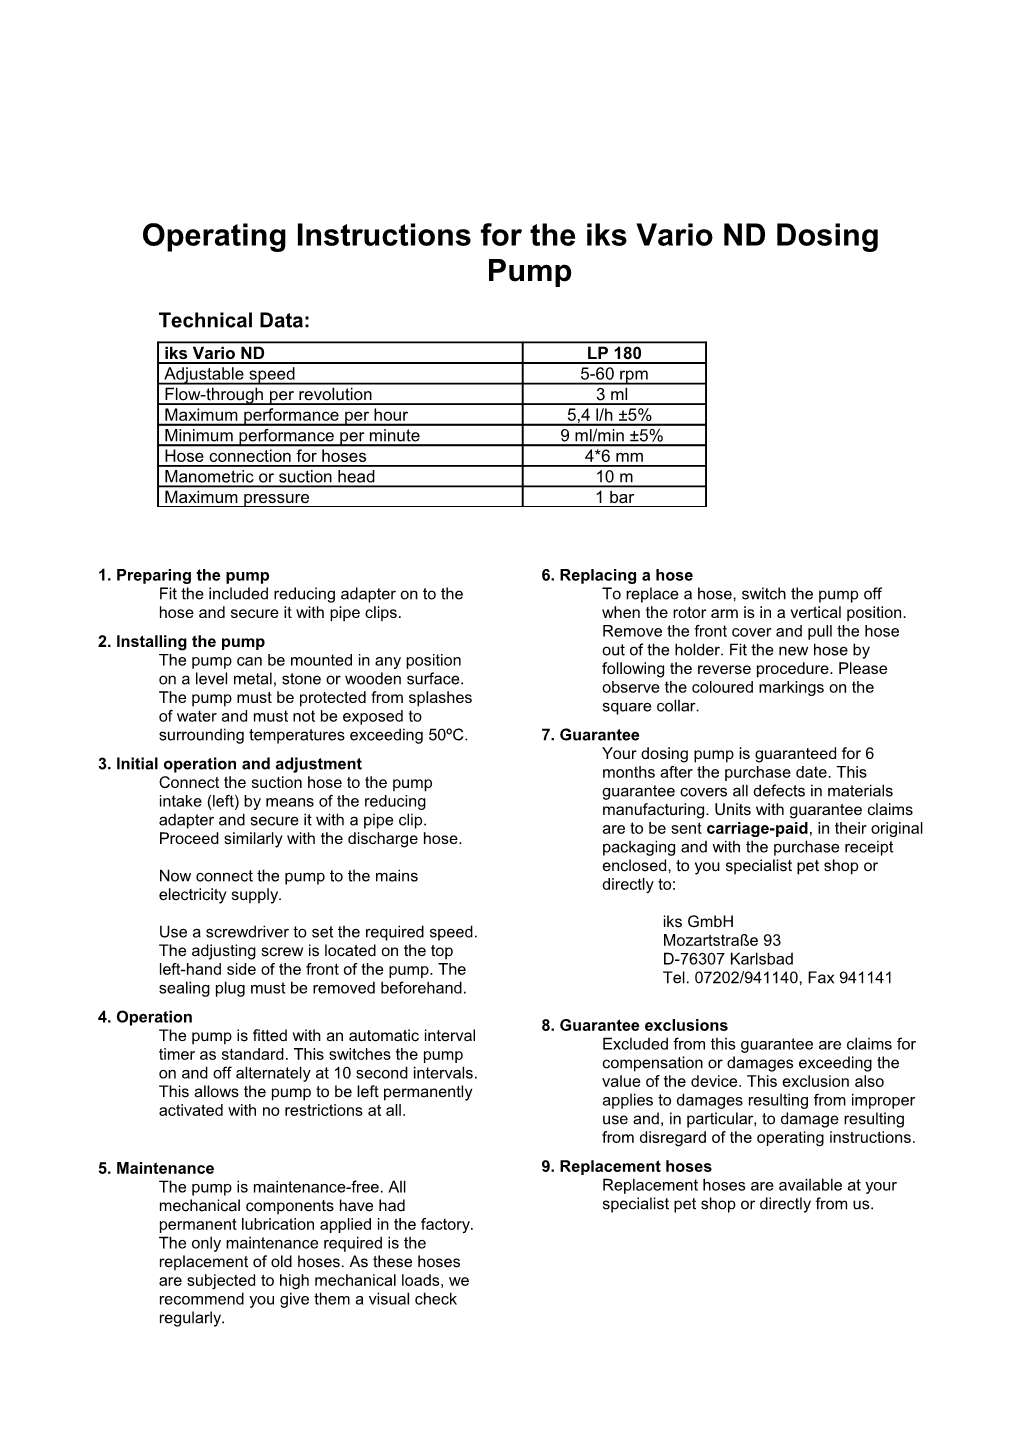 Operating Instructions for the Iks Vario ND Dosing Pump